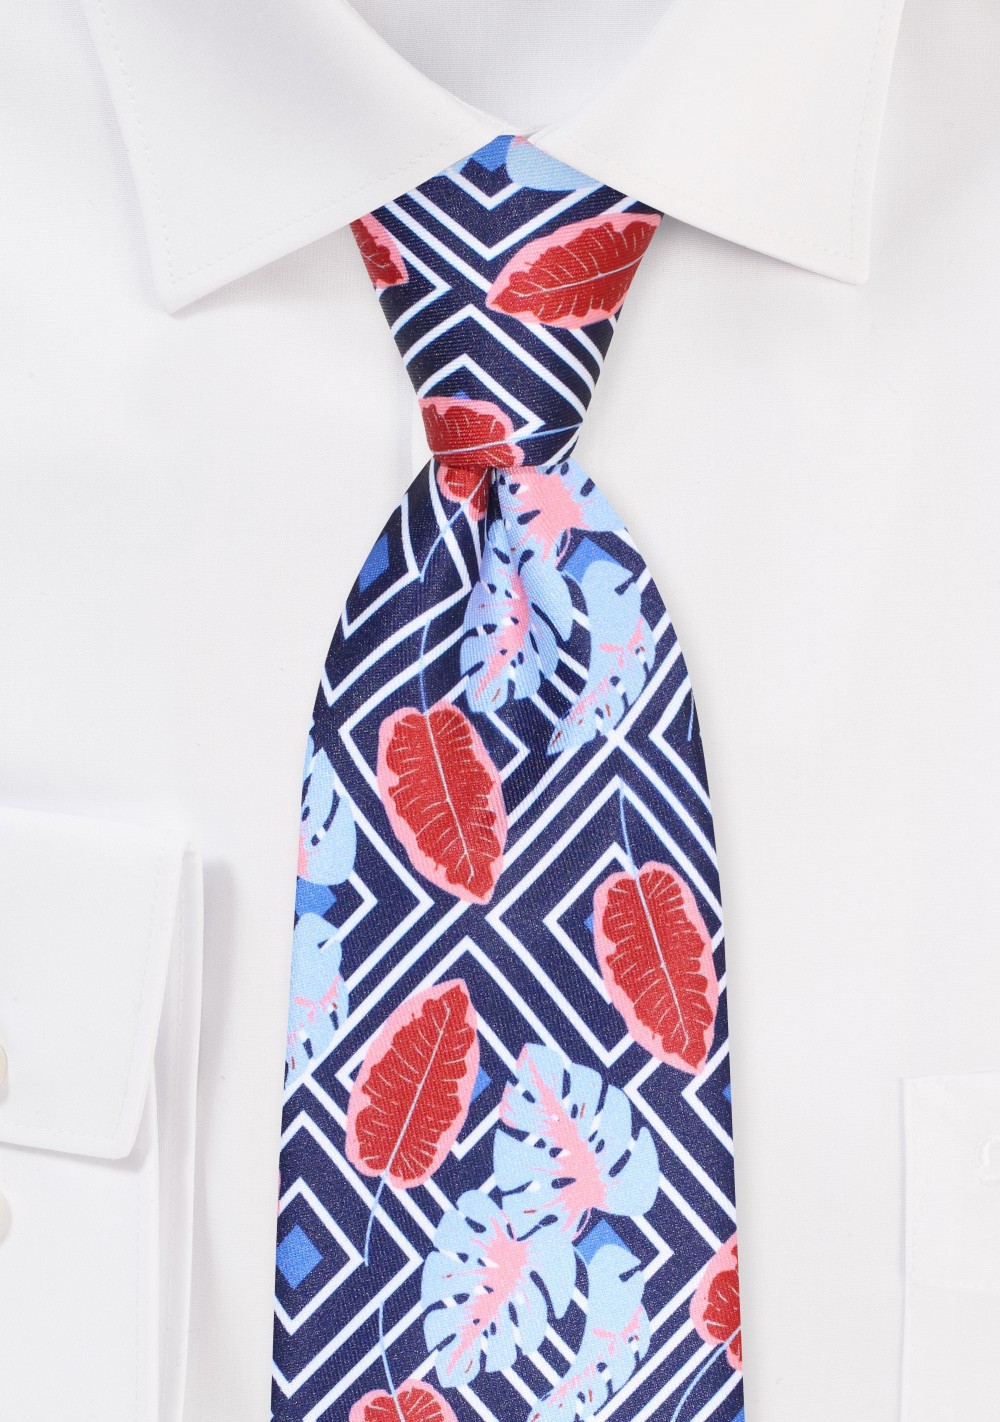 Check and Leaf Print Tie in Navy